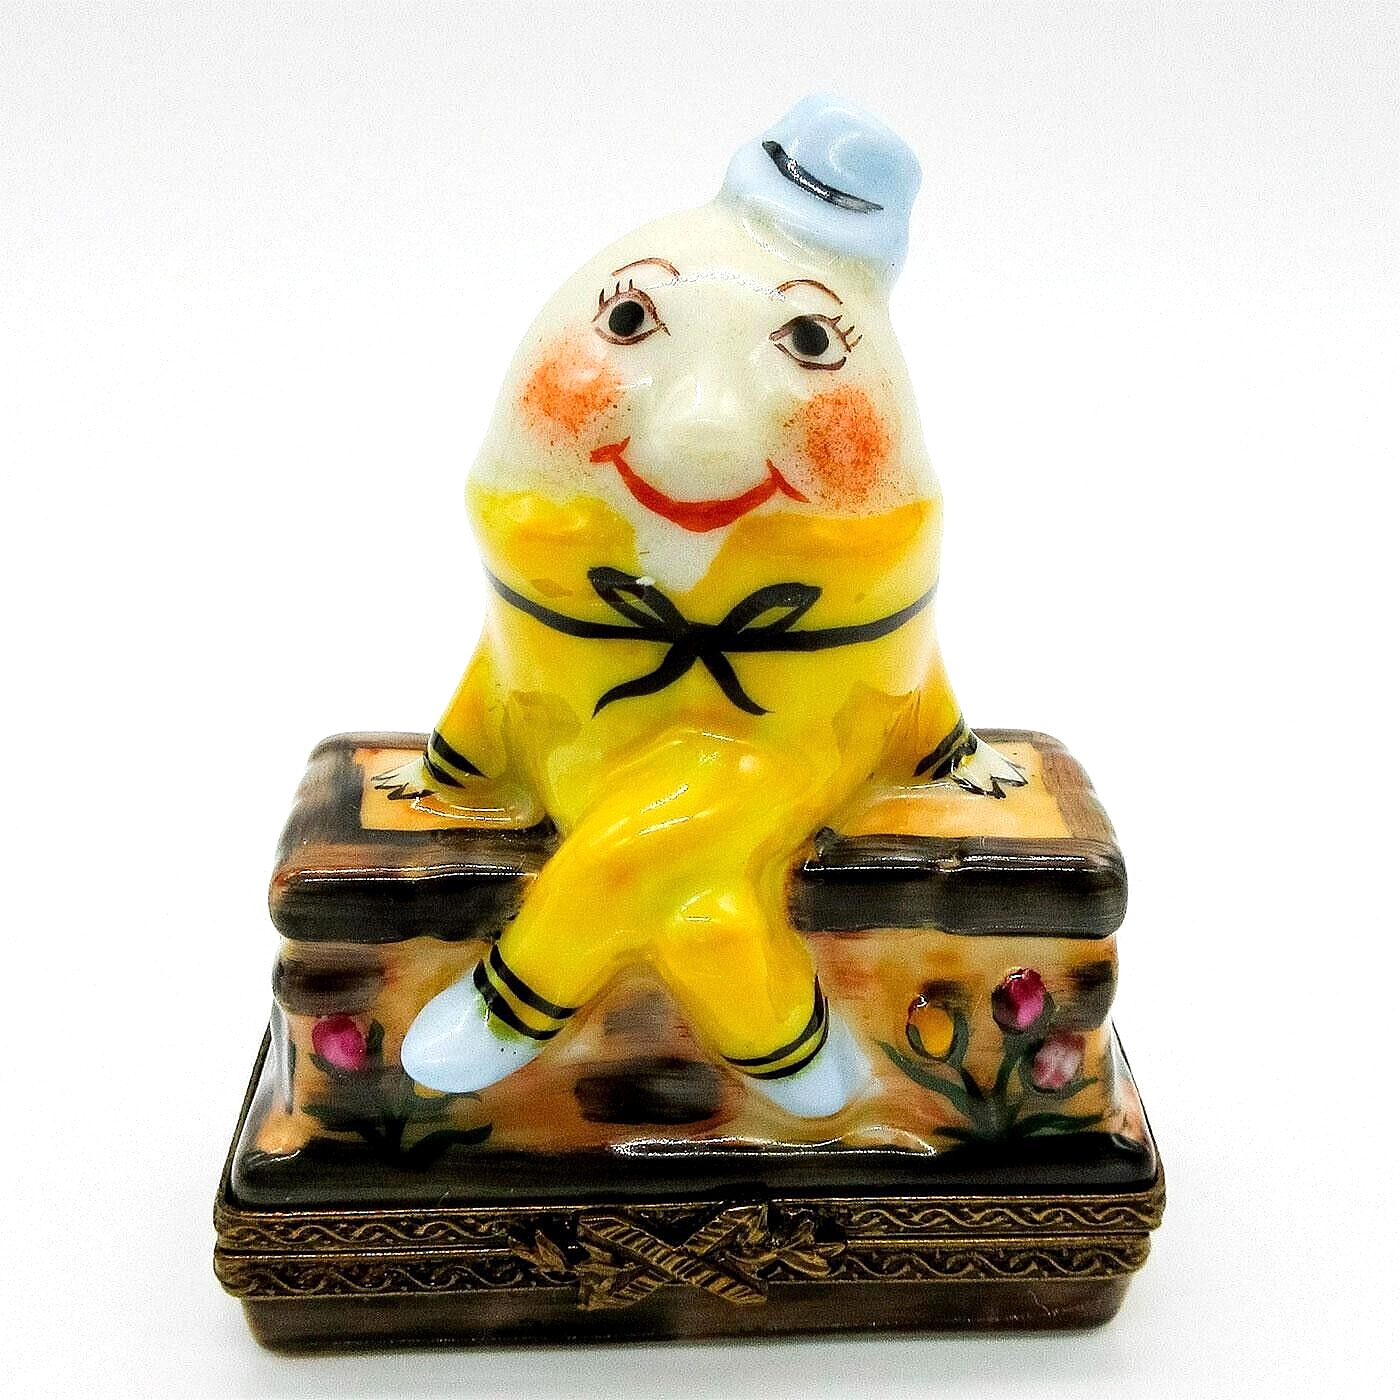 Genuine Hand Painted HUMPTY DUMPTY French Limoges Porcelain Trinket Box  NEW